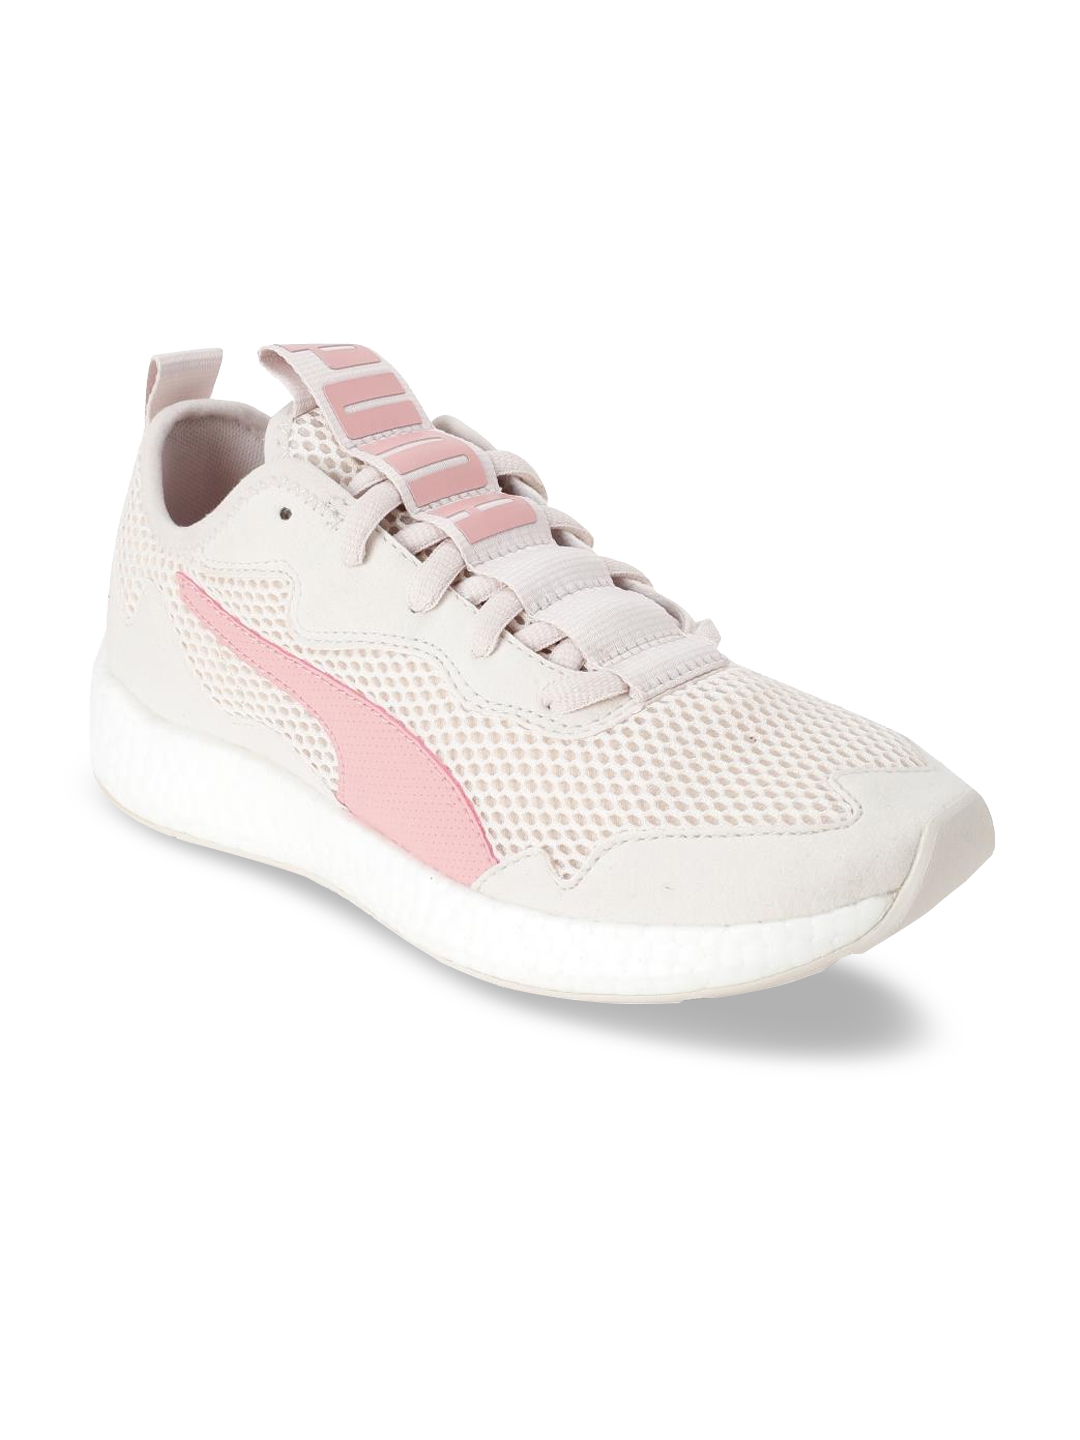 Buy Puma Women Cream Coloured Textile Running Shoes - Sports Shoes for ...